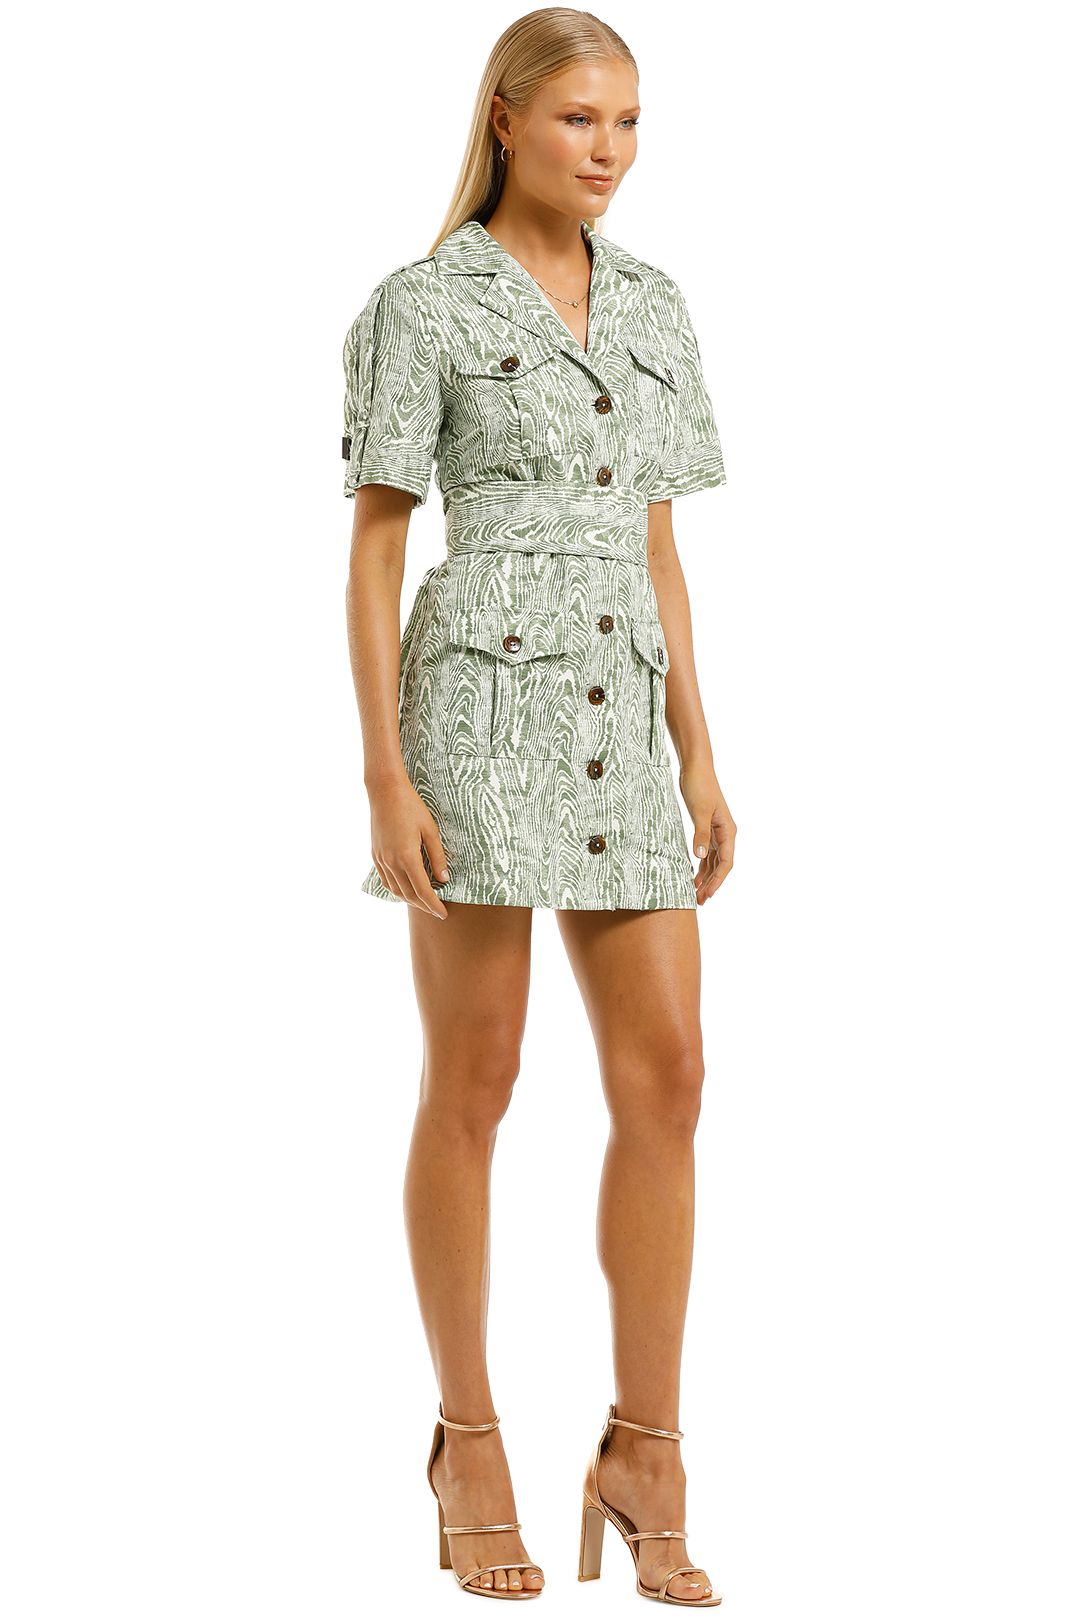 CMEO-Collective-Energised-Dress-Ivy-Woodgrain-Side